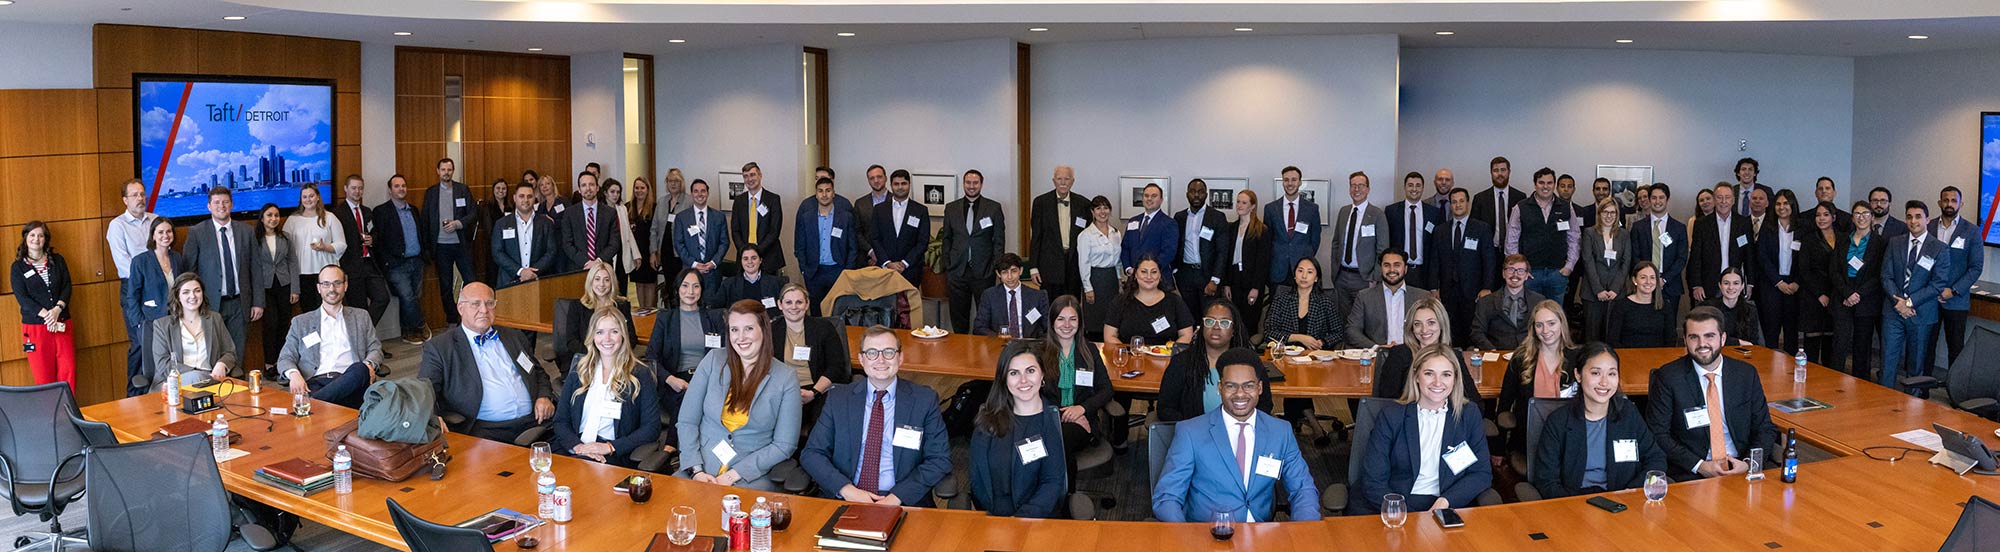 Numerous students and judges at the Wayne State Jaffe/Taft Transactional Law Invitational smile and pose for a picture as many stand and others are seated at a large conference table in their business attire.